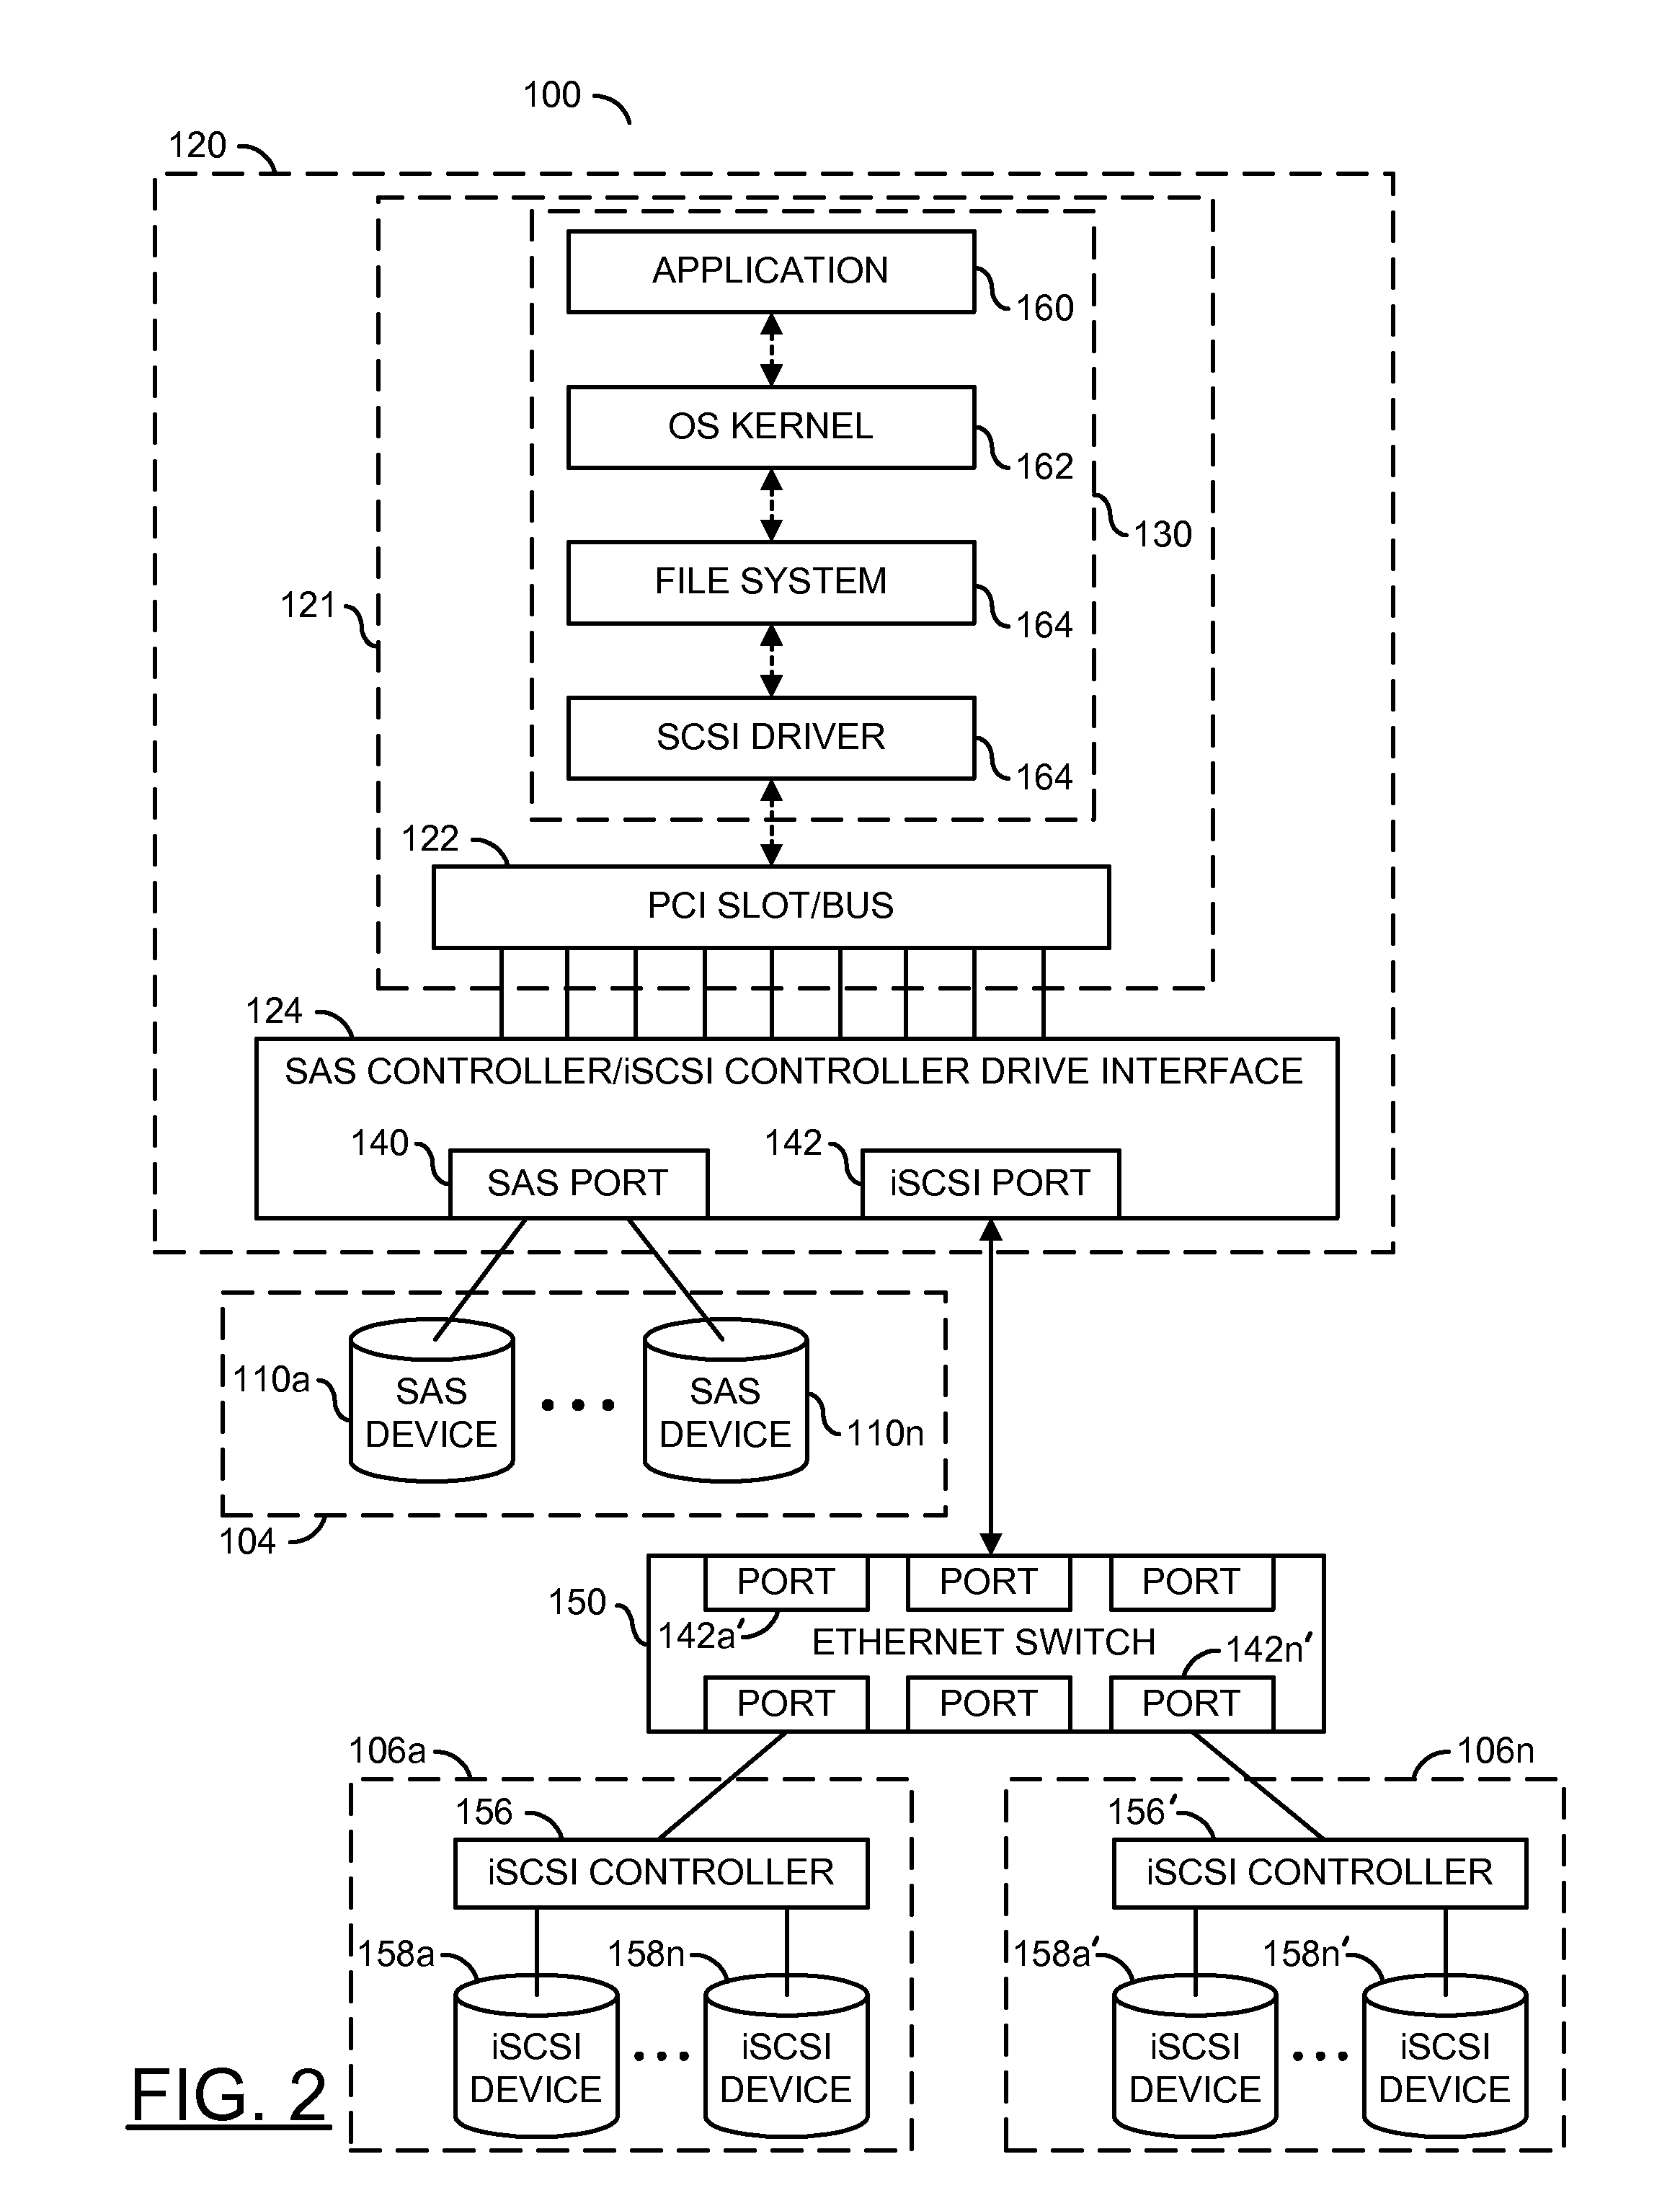 METHOD AND SYSTEM FOR COUPLING SERIAL ATTACHED SCSI (SAS) DEVICES AND INTERNET SMALL COMPUTER SYSTEM INTERNET (iSCSI) DEVICES THROUGH SINGLE HOST BUS ADAPTER